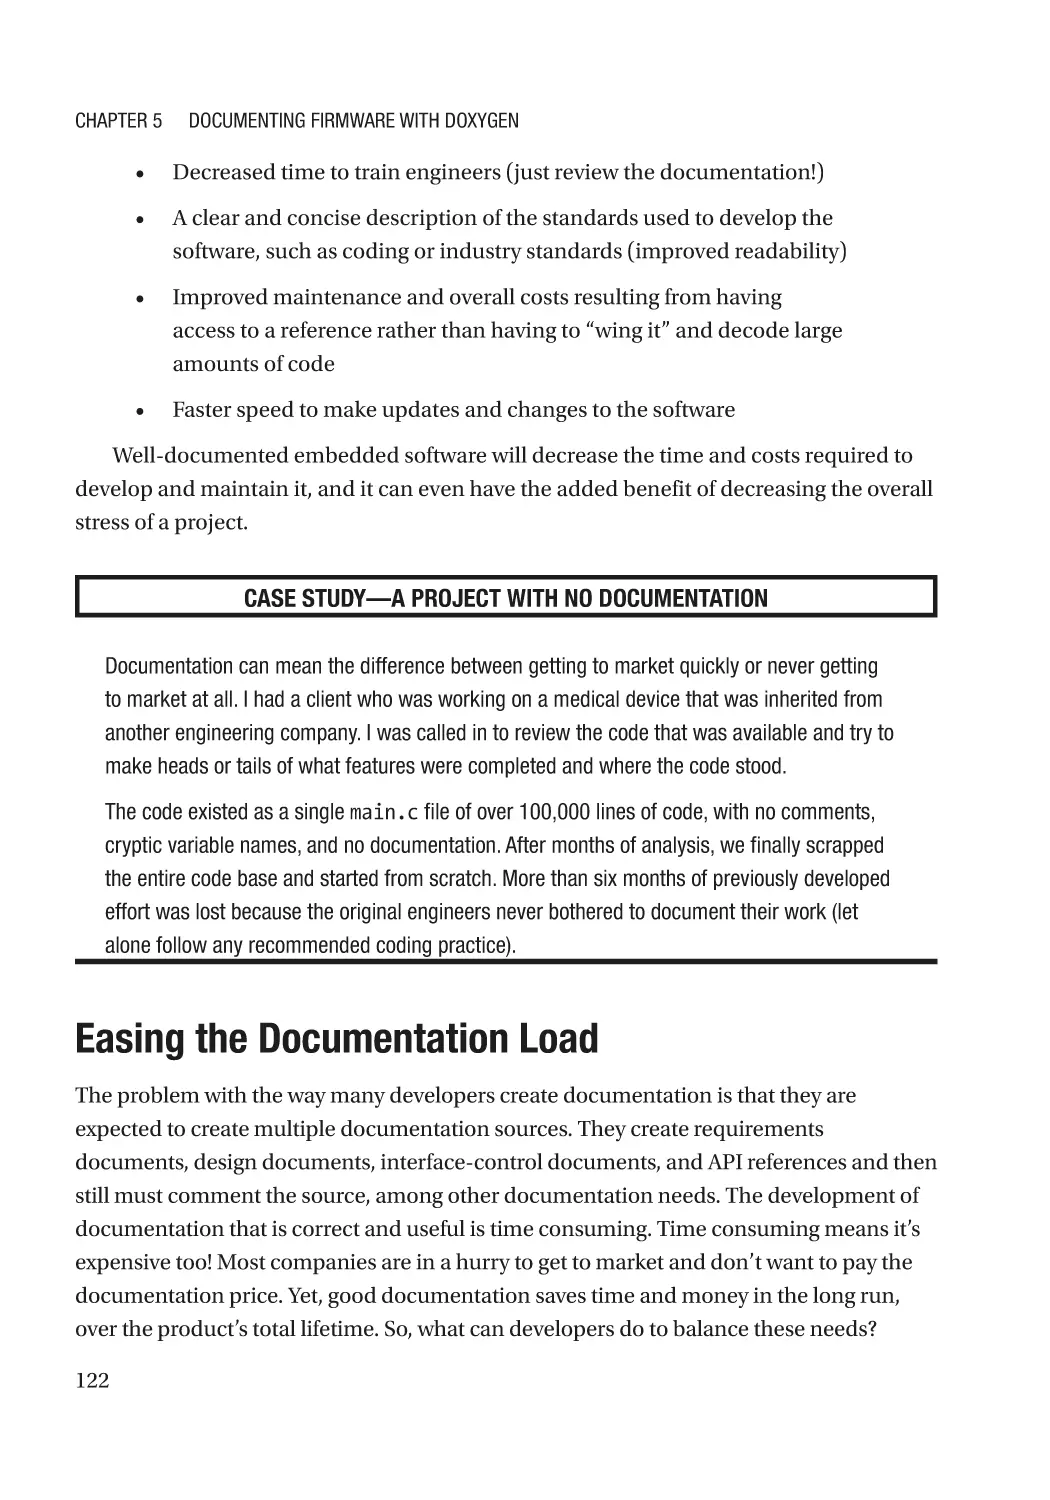 Easing the Documentation Load